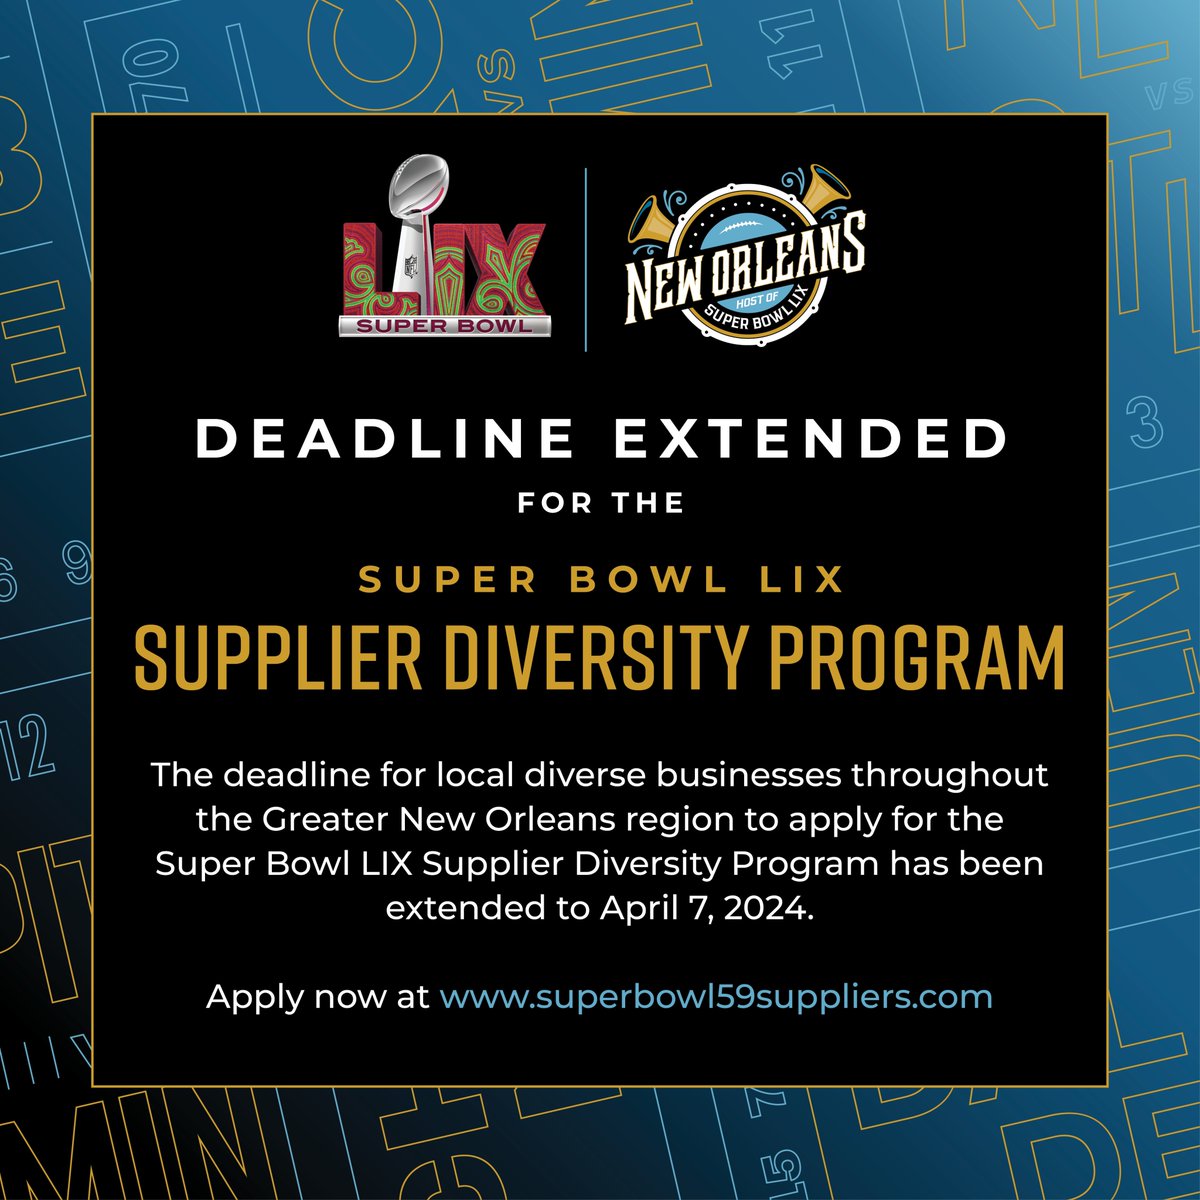 The application deadline for the Super Bowl LIX Supplier Diversity Program has been extended to APRIL 7! This is the last call for local diverse businesses throughout the 10-parish Greater New Orleans region to apply for the program. 🚨 Apply now at superbowl59suppliers.com